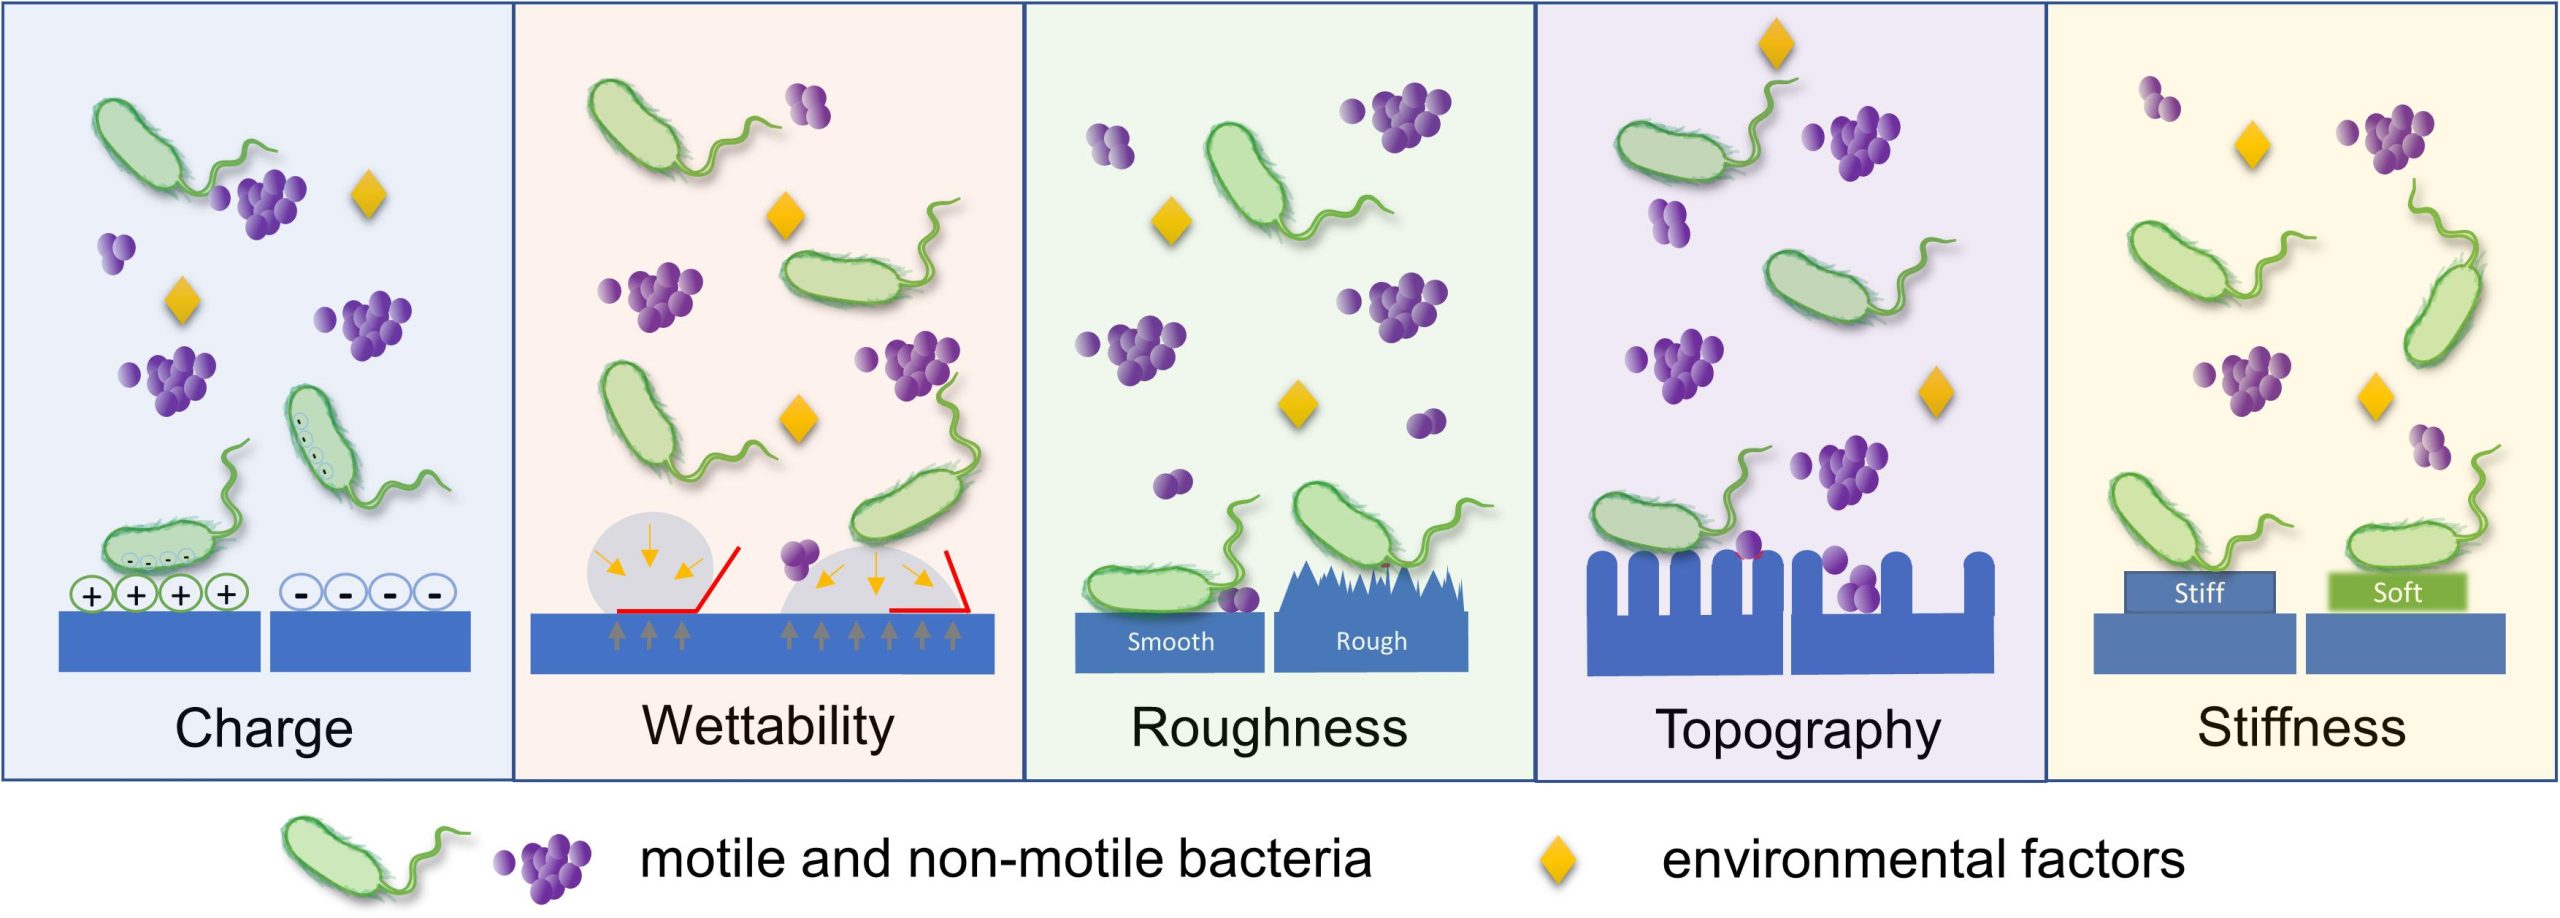 Infographic showing which surface characteristics influence bacterial adhesion to a surface: charge, wettability, roughness, topography, stiffness